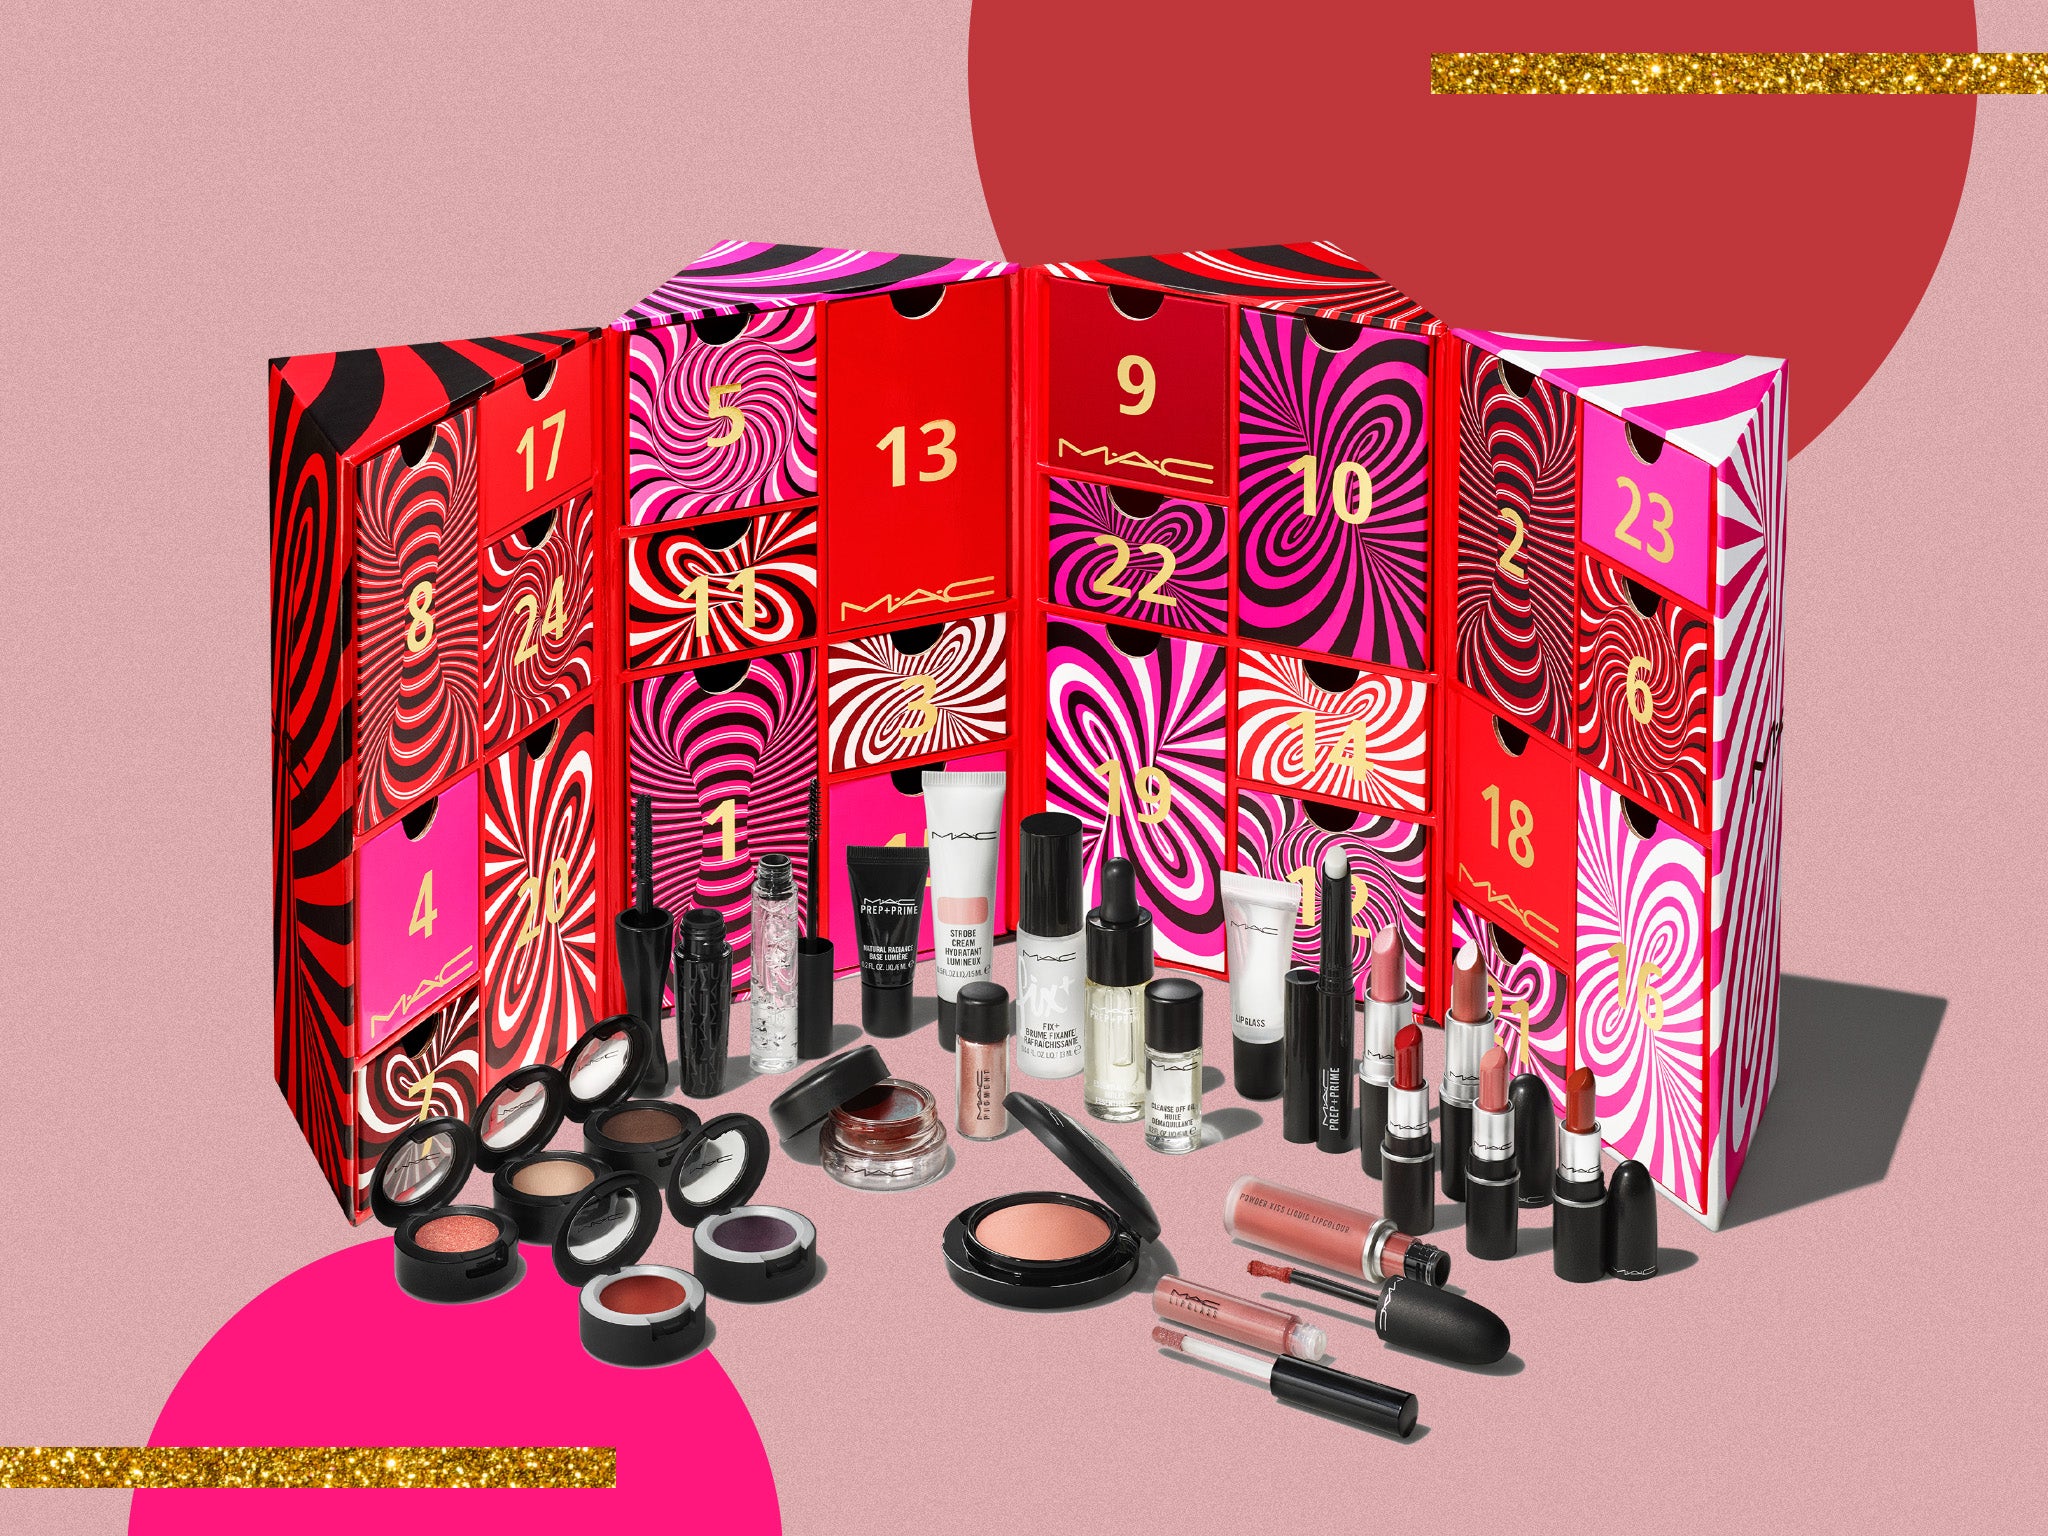 Since the brand first launched in the eighties until now, its make-up has been a staple in all the best professional make-up artist’s kits